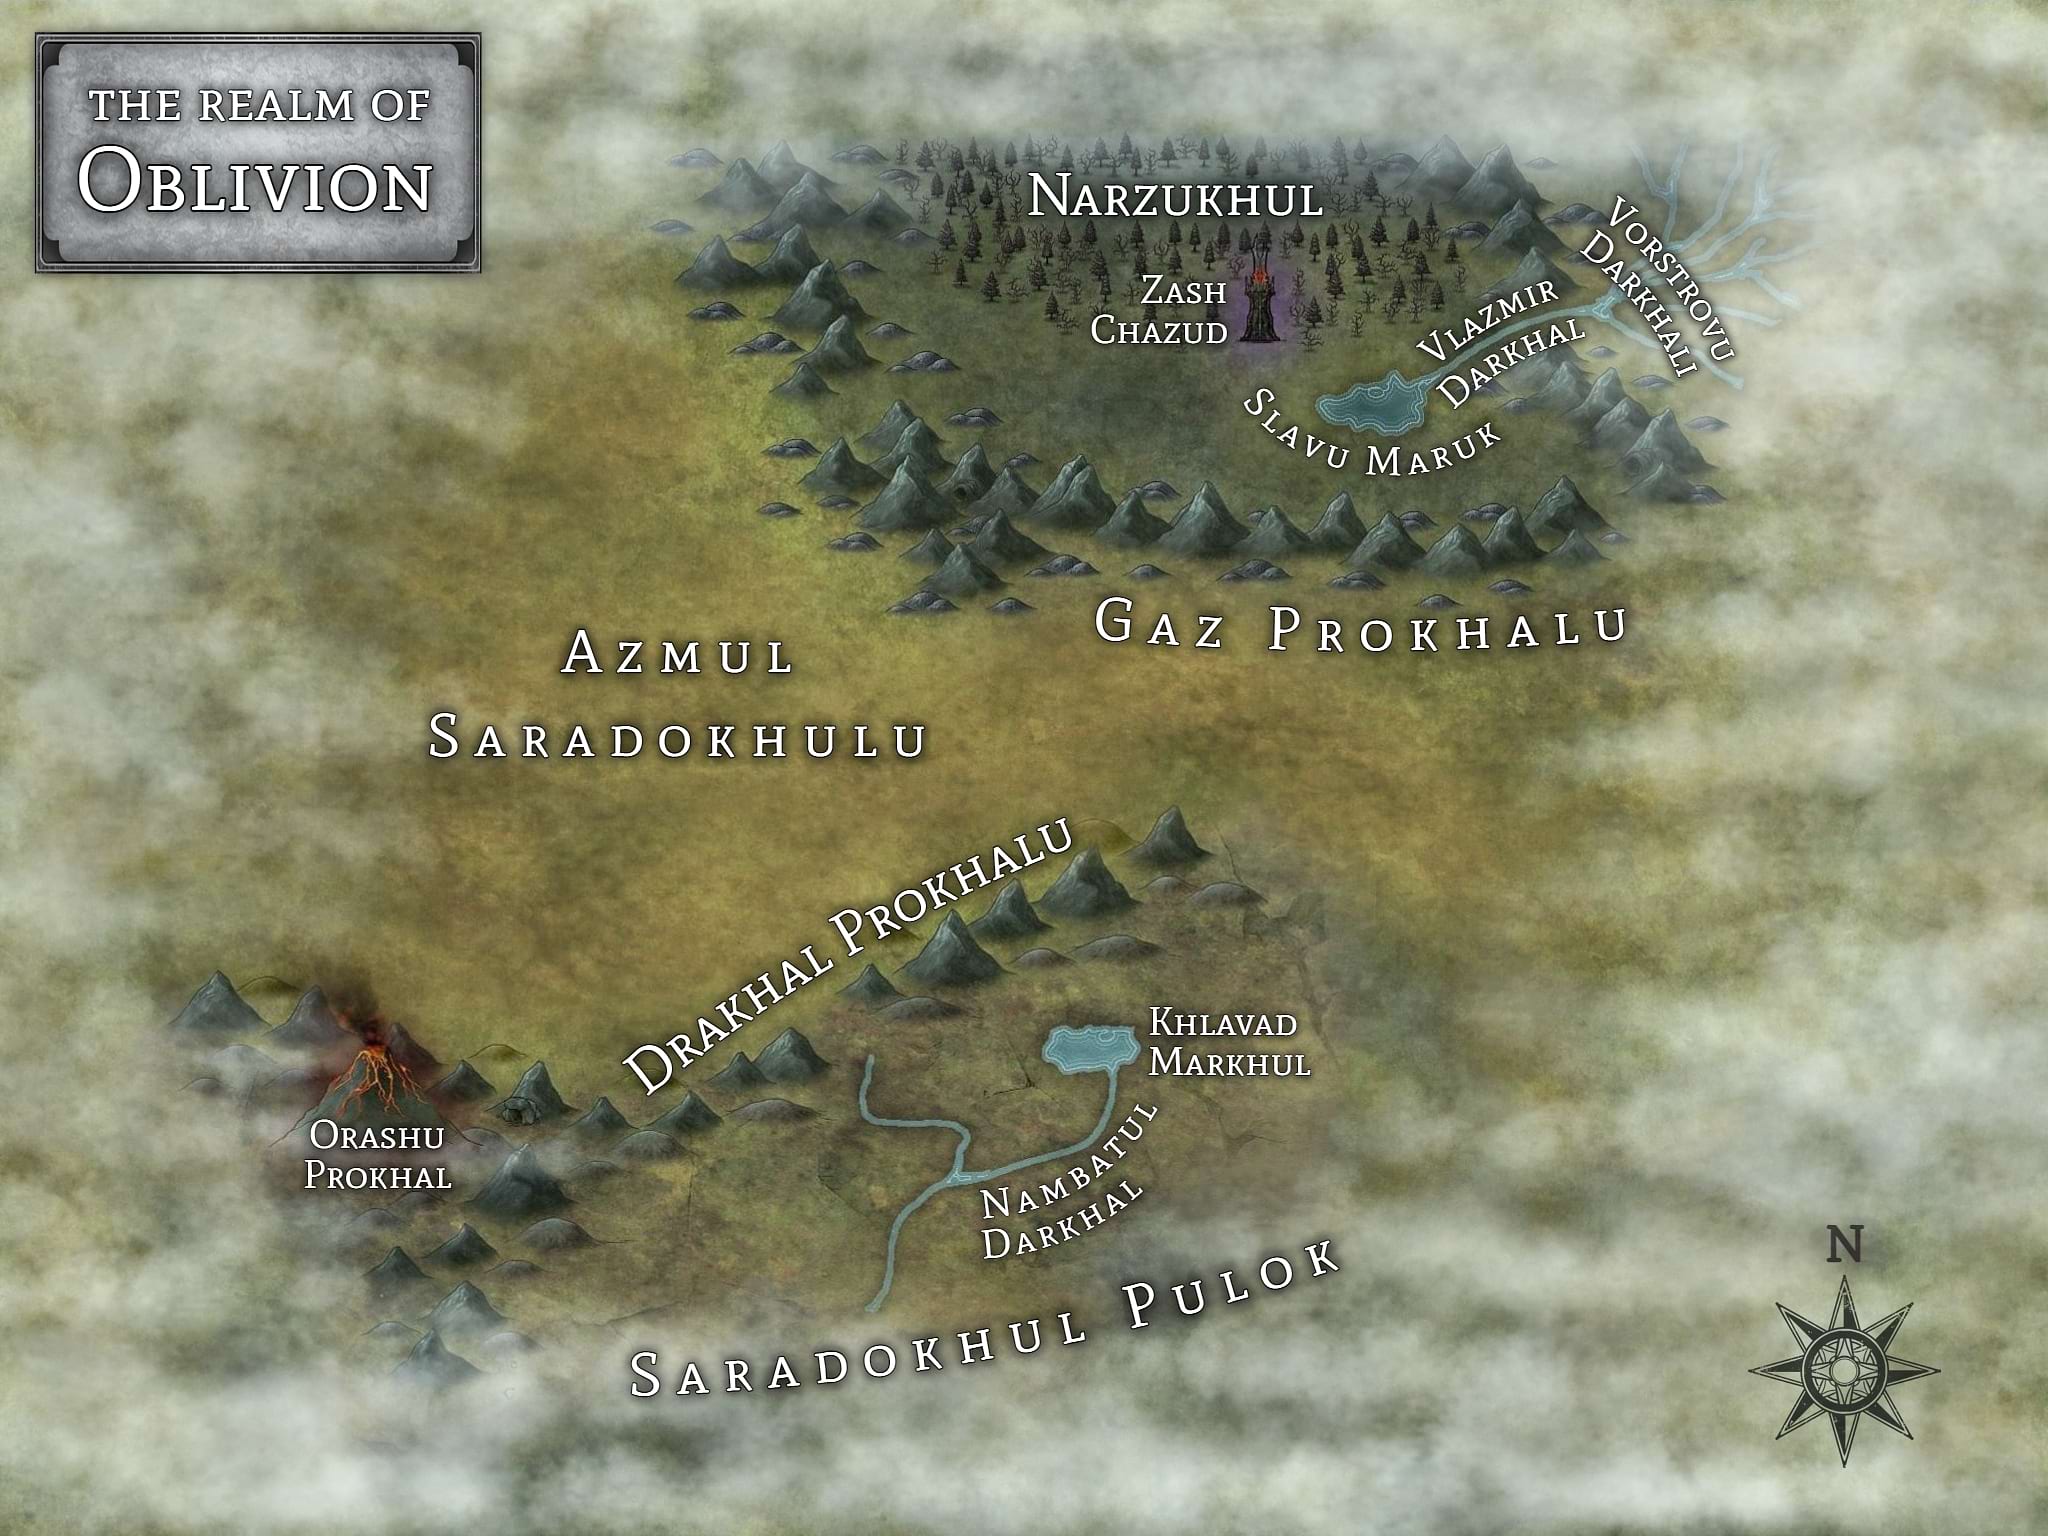 Map of Oblivion from the World of Lasniniar epic fantasy series